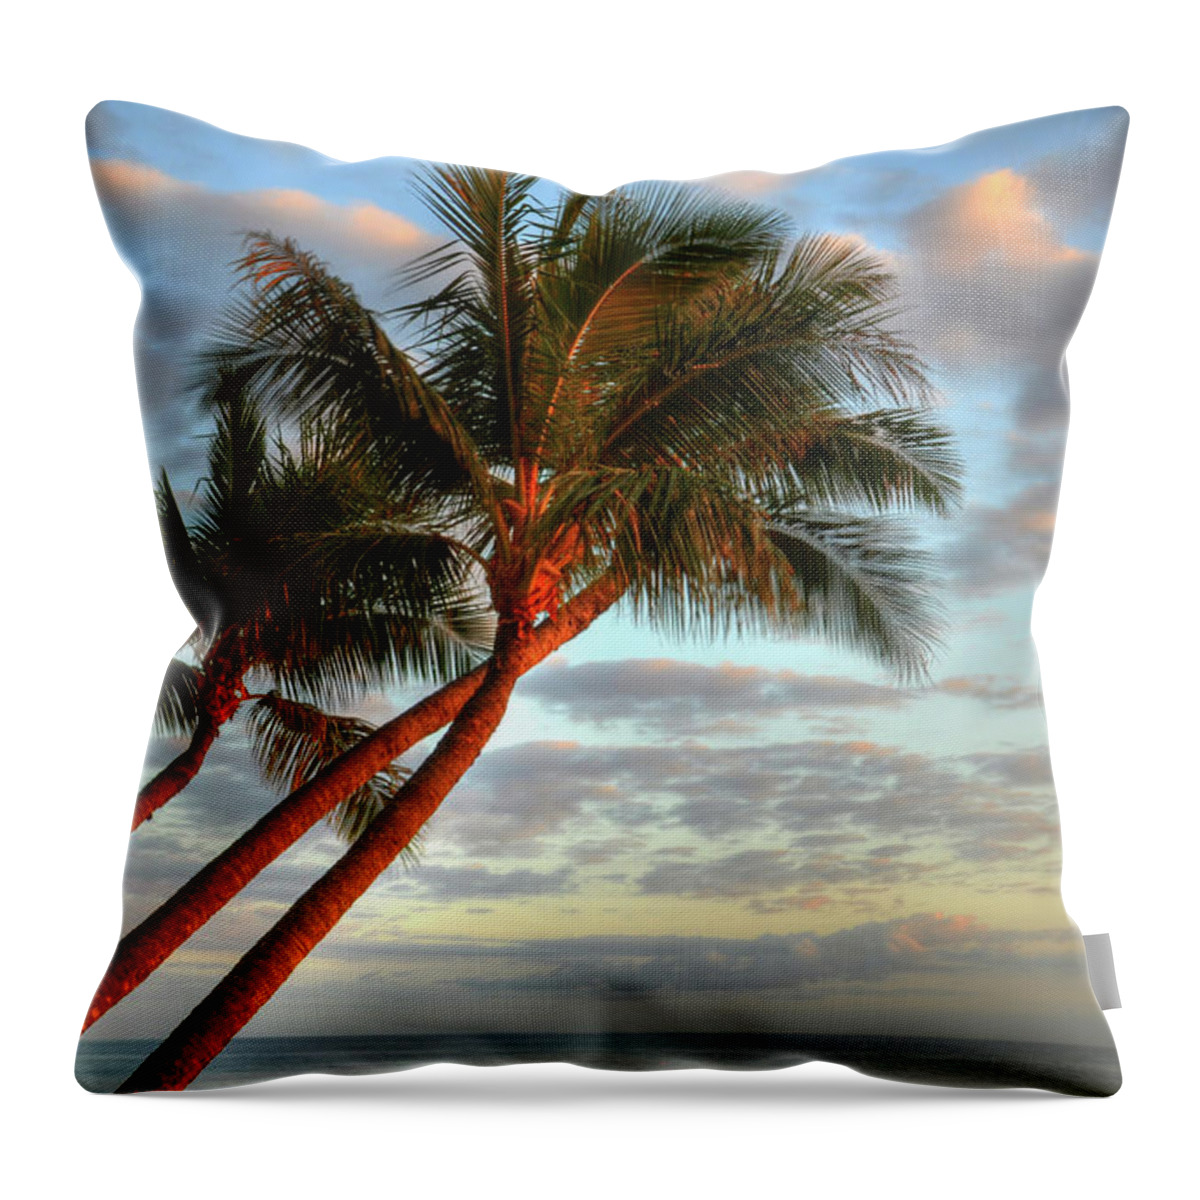 Coconut Palms Throw Pillow featuring the photograph Coconut Palms by Kelly Wade